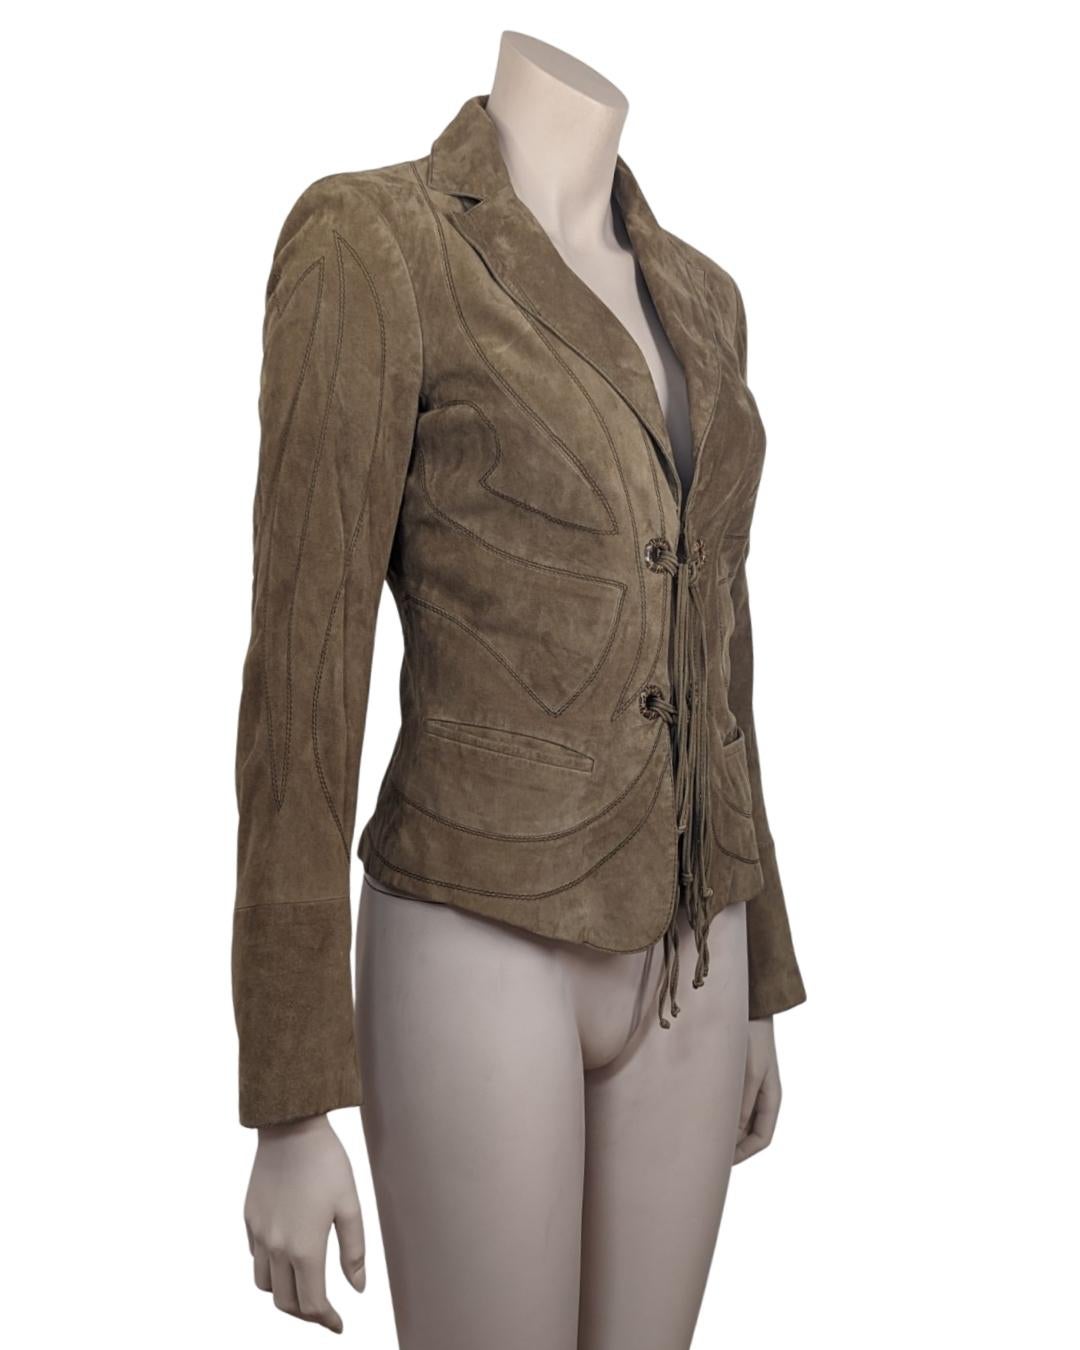 Roberto Cavalli Butterfly Suede Leather Jacket with delicate silk lining.
Circa 2000s.

. Butterfly slim_cut design silhouette
· V-neck
· Whipstitch detailling
. High neck
 

Fits XS, S

Flat measurements : 
pit to pit : 42 cm
Breast : 40 cm
Length